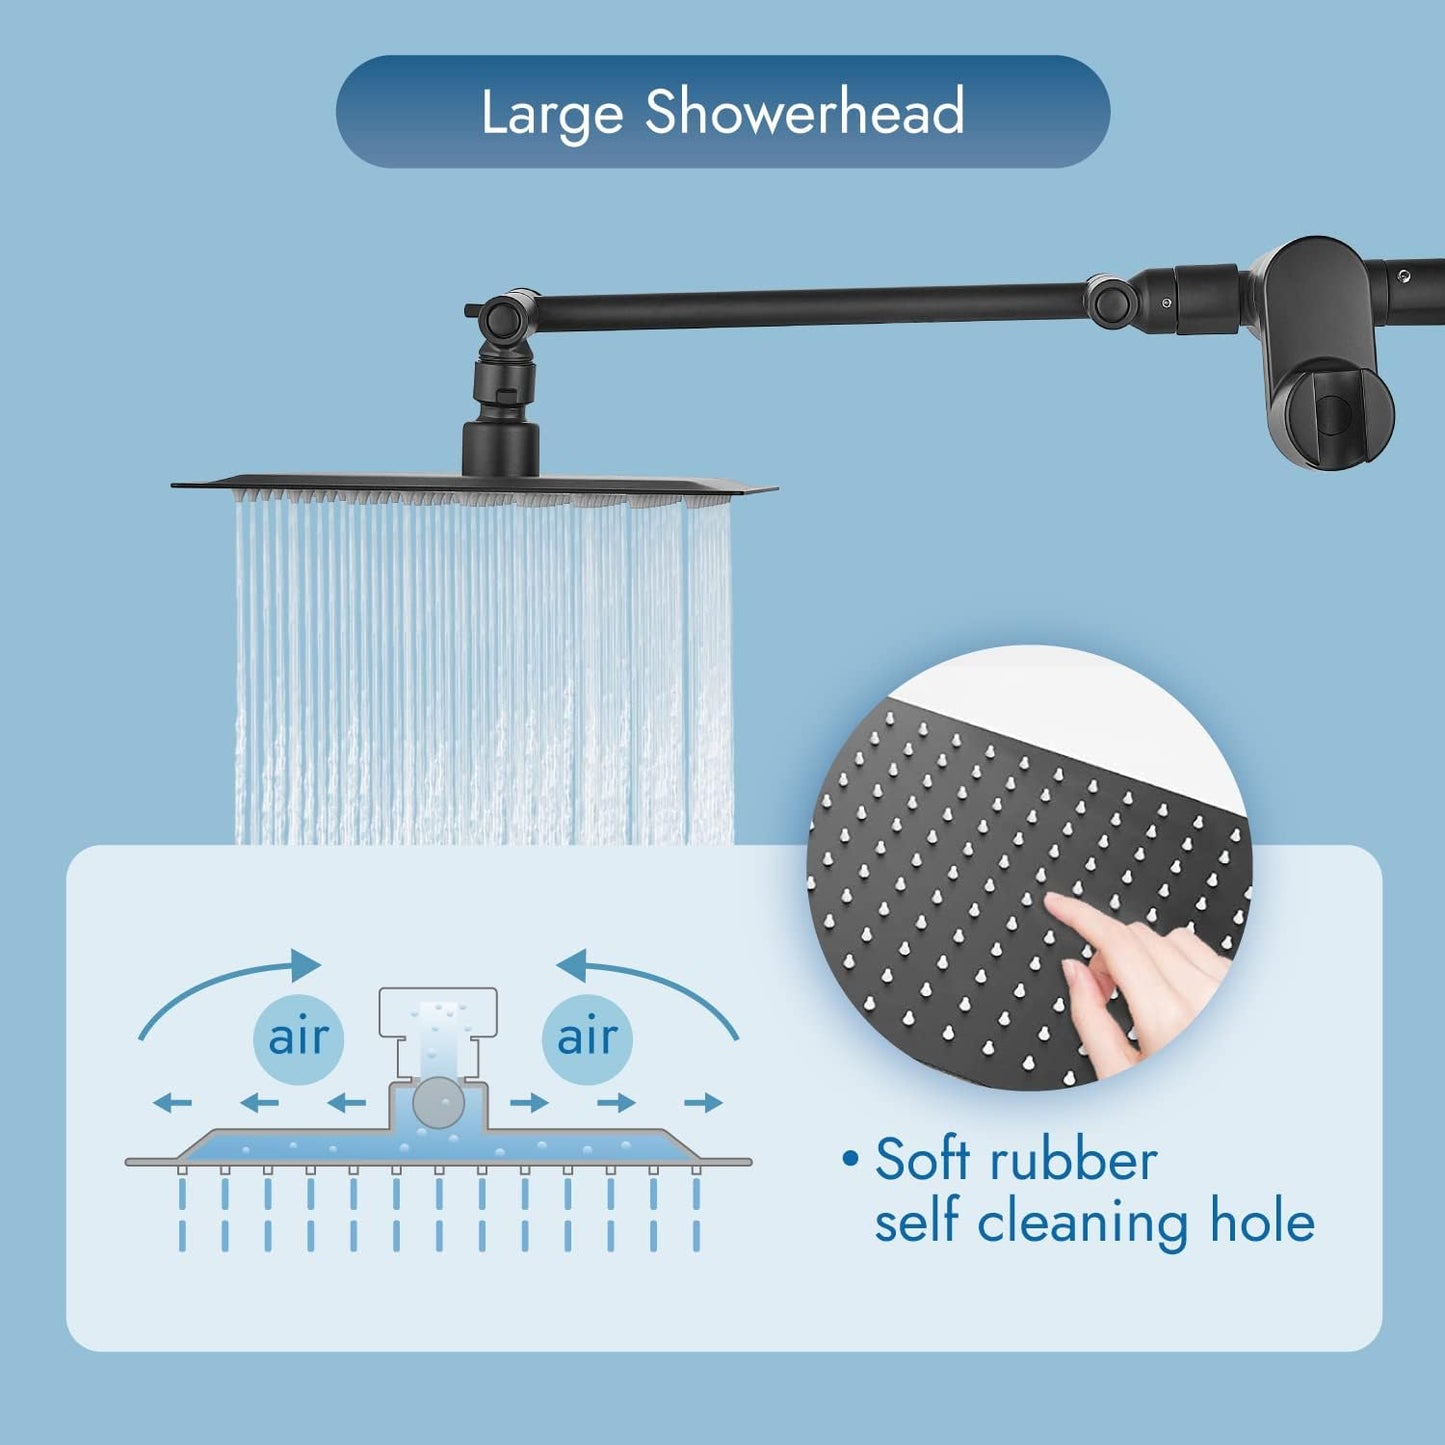 
                  
                    Cinwiny Dual Square Shower Head Combo All Metal High Pressure 8 inch Rain Shower Head with Handheld with 71" Extra Long Flexible Hose,Smooth 3-Way Diverter,Adjustable Extension Arm
                  
                